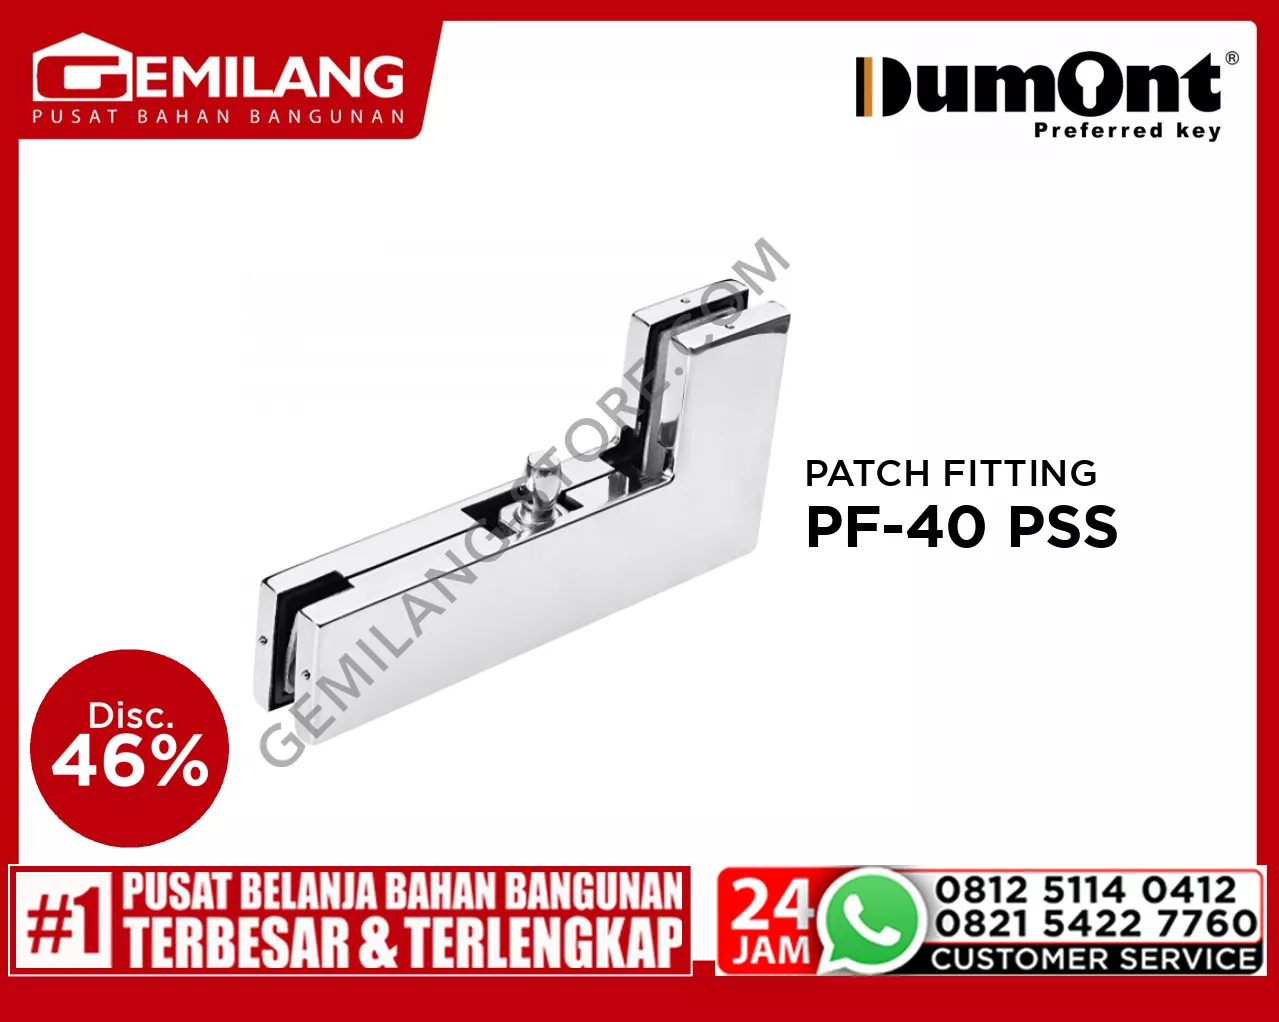 DUMONT PATCH FITTING PF-40 PSS